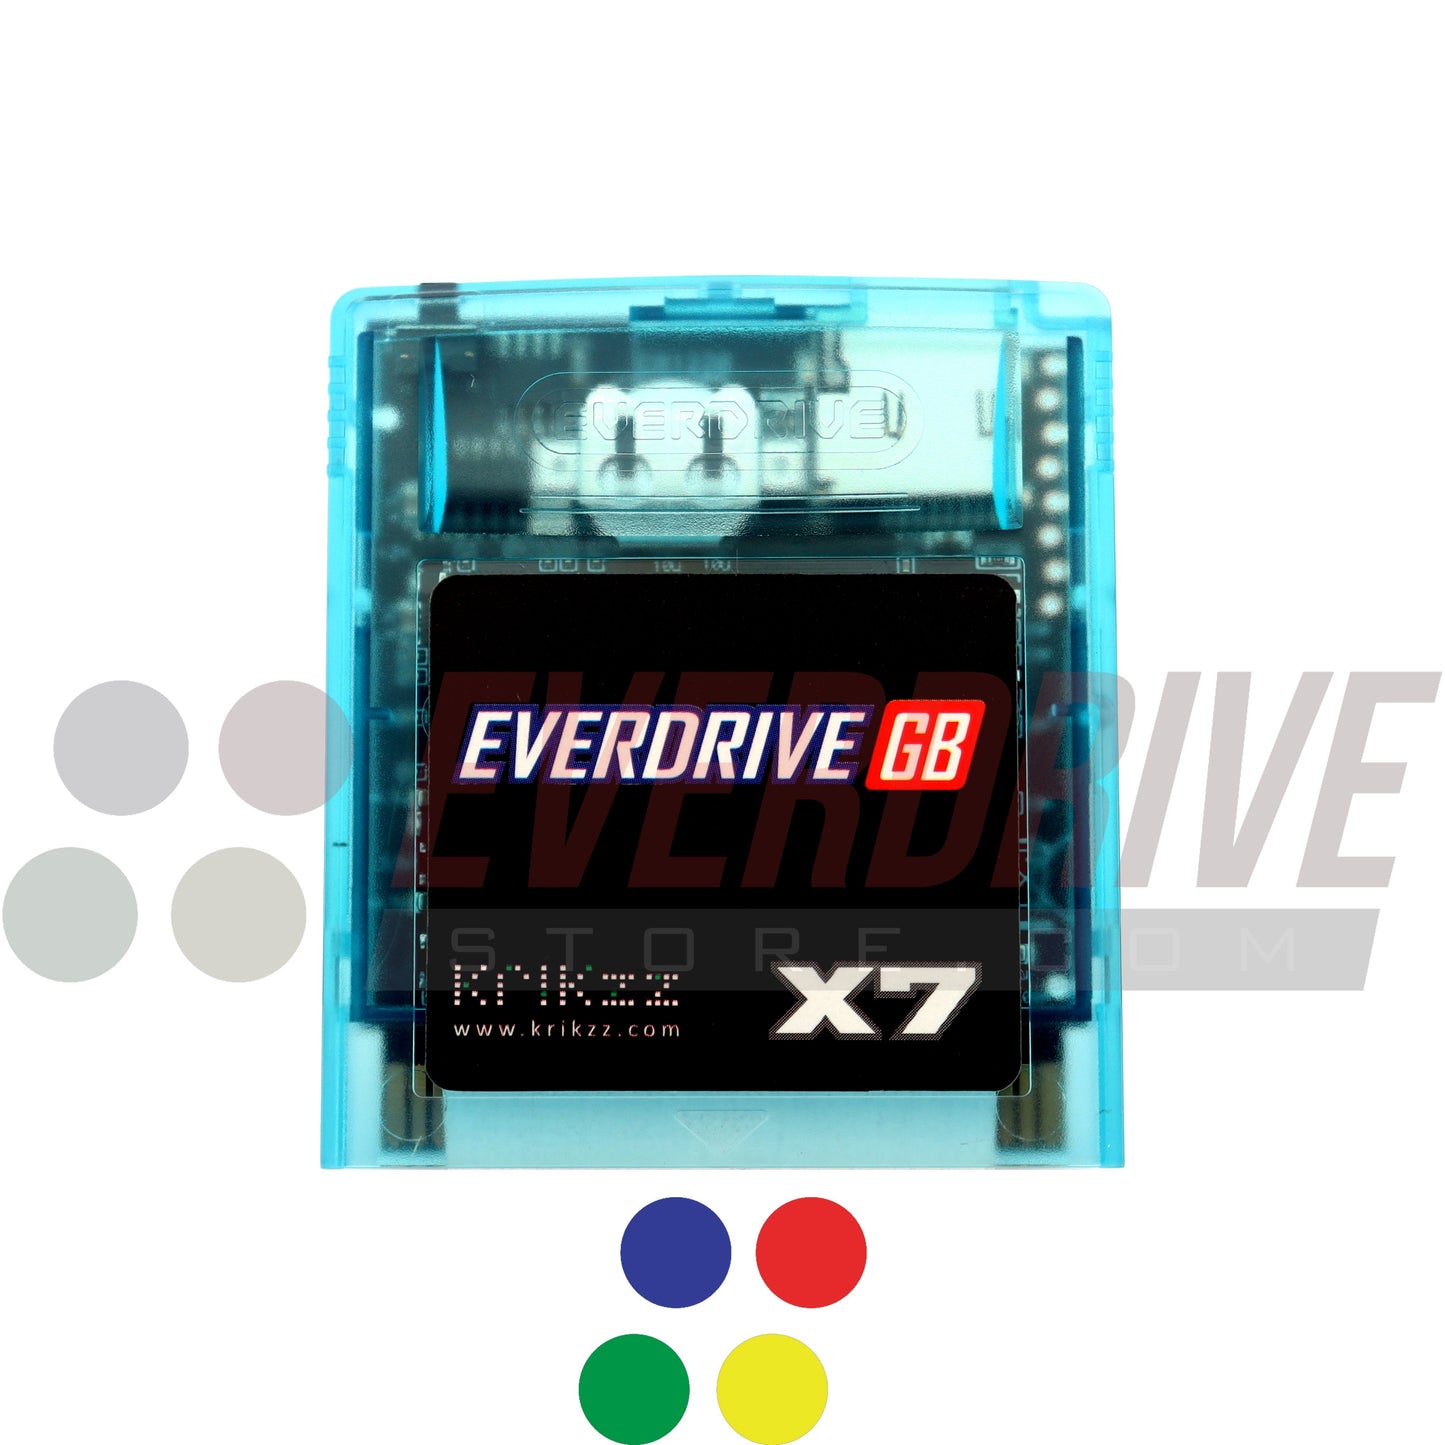 Everdrive GB X7 - Frosted Turquoise